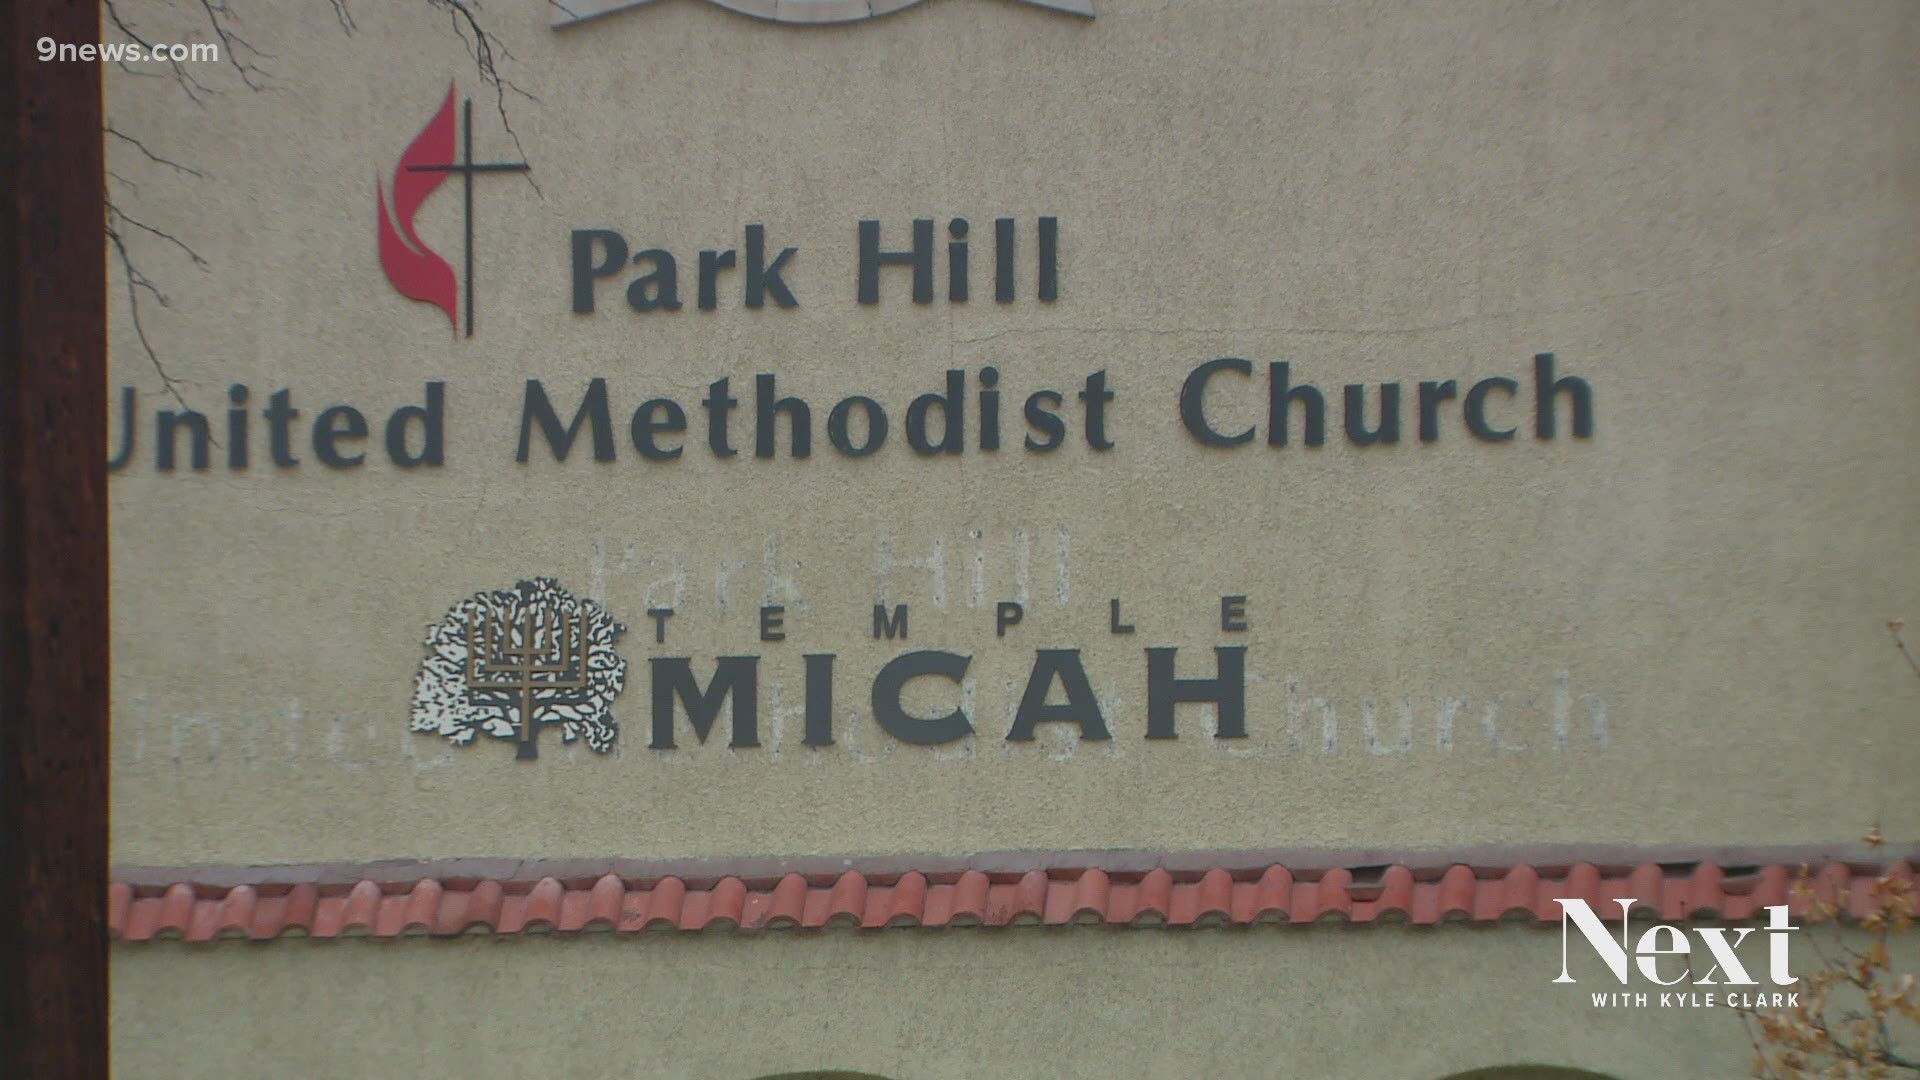 Some residents in Park Hill sued to stop the campsite for people experiencing homelessness from being established in a church parking lot.